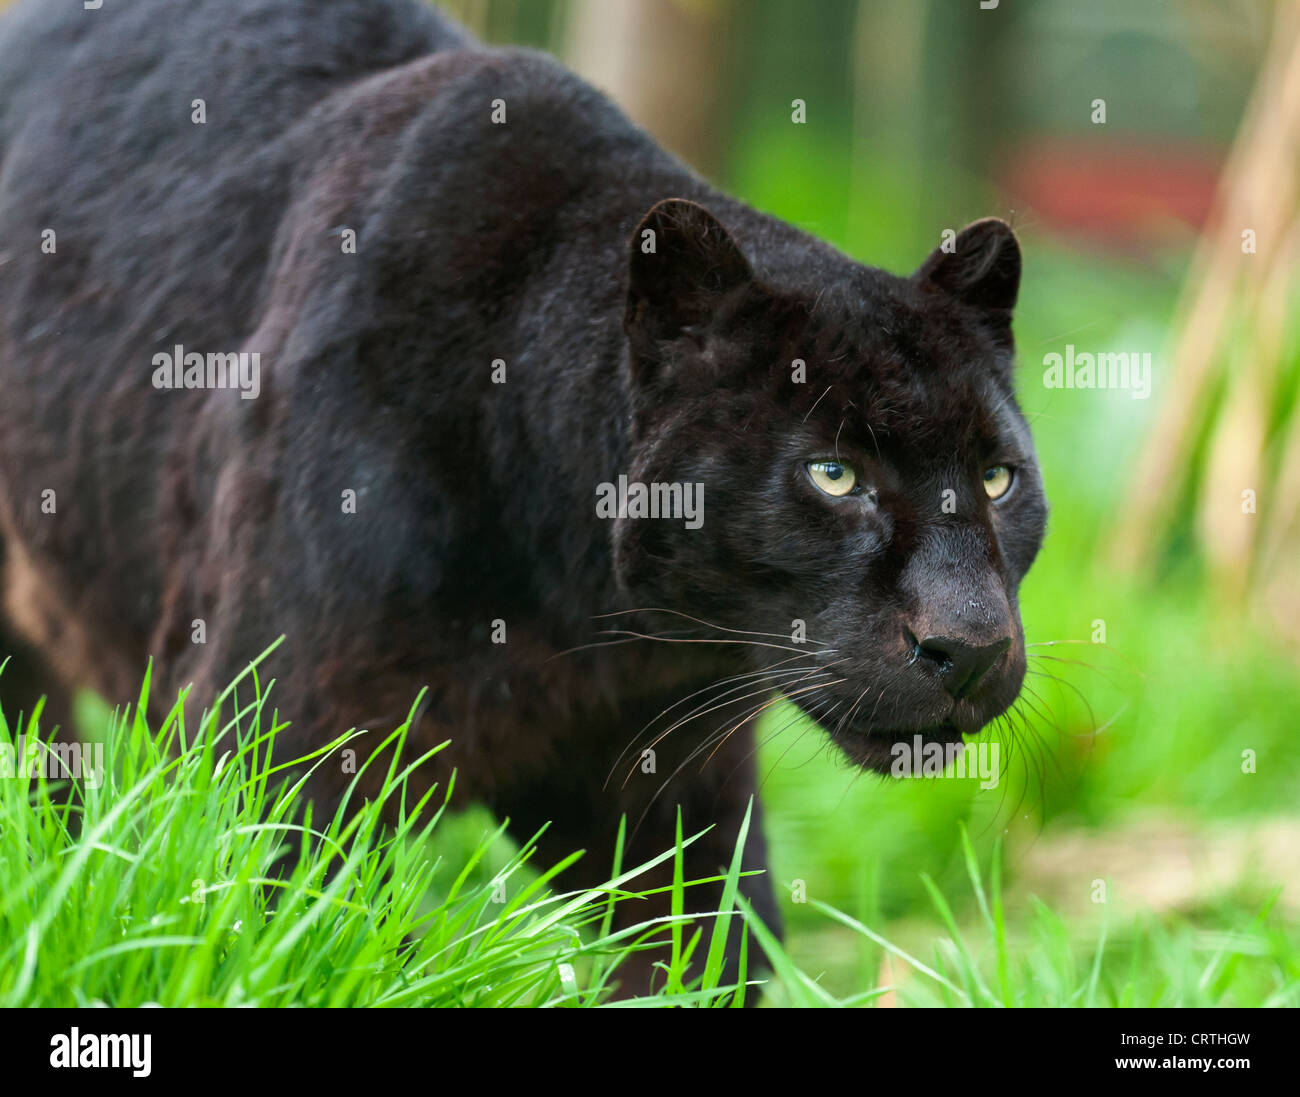 Black Panther in the grass Stock Photo